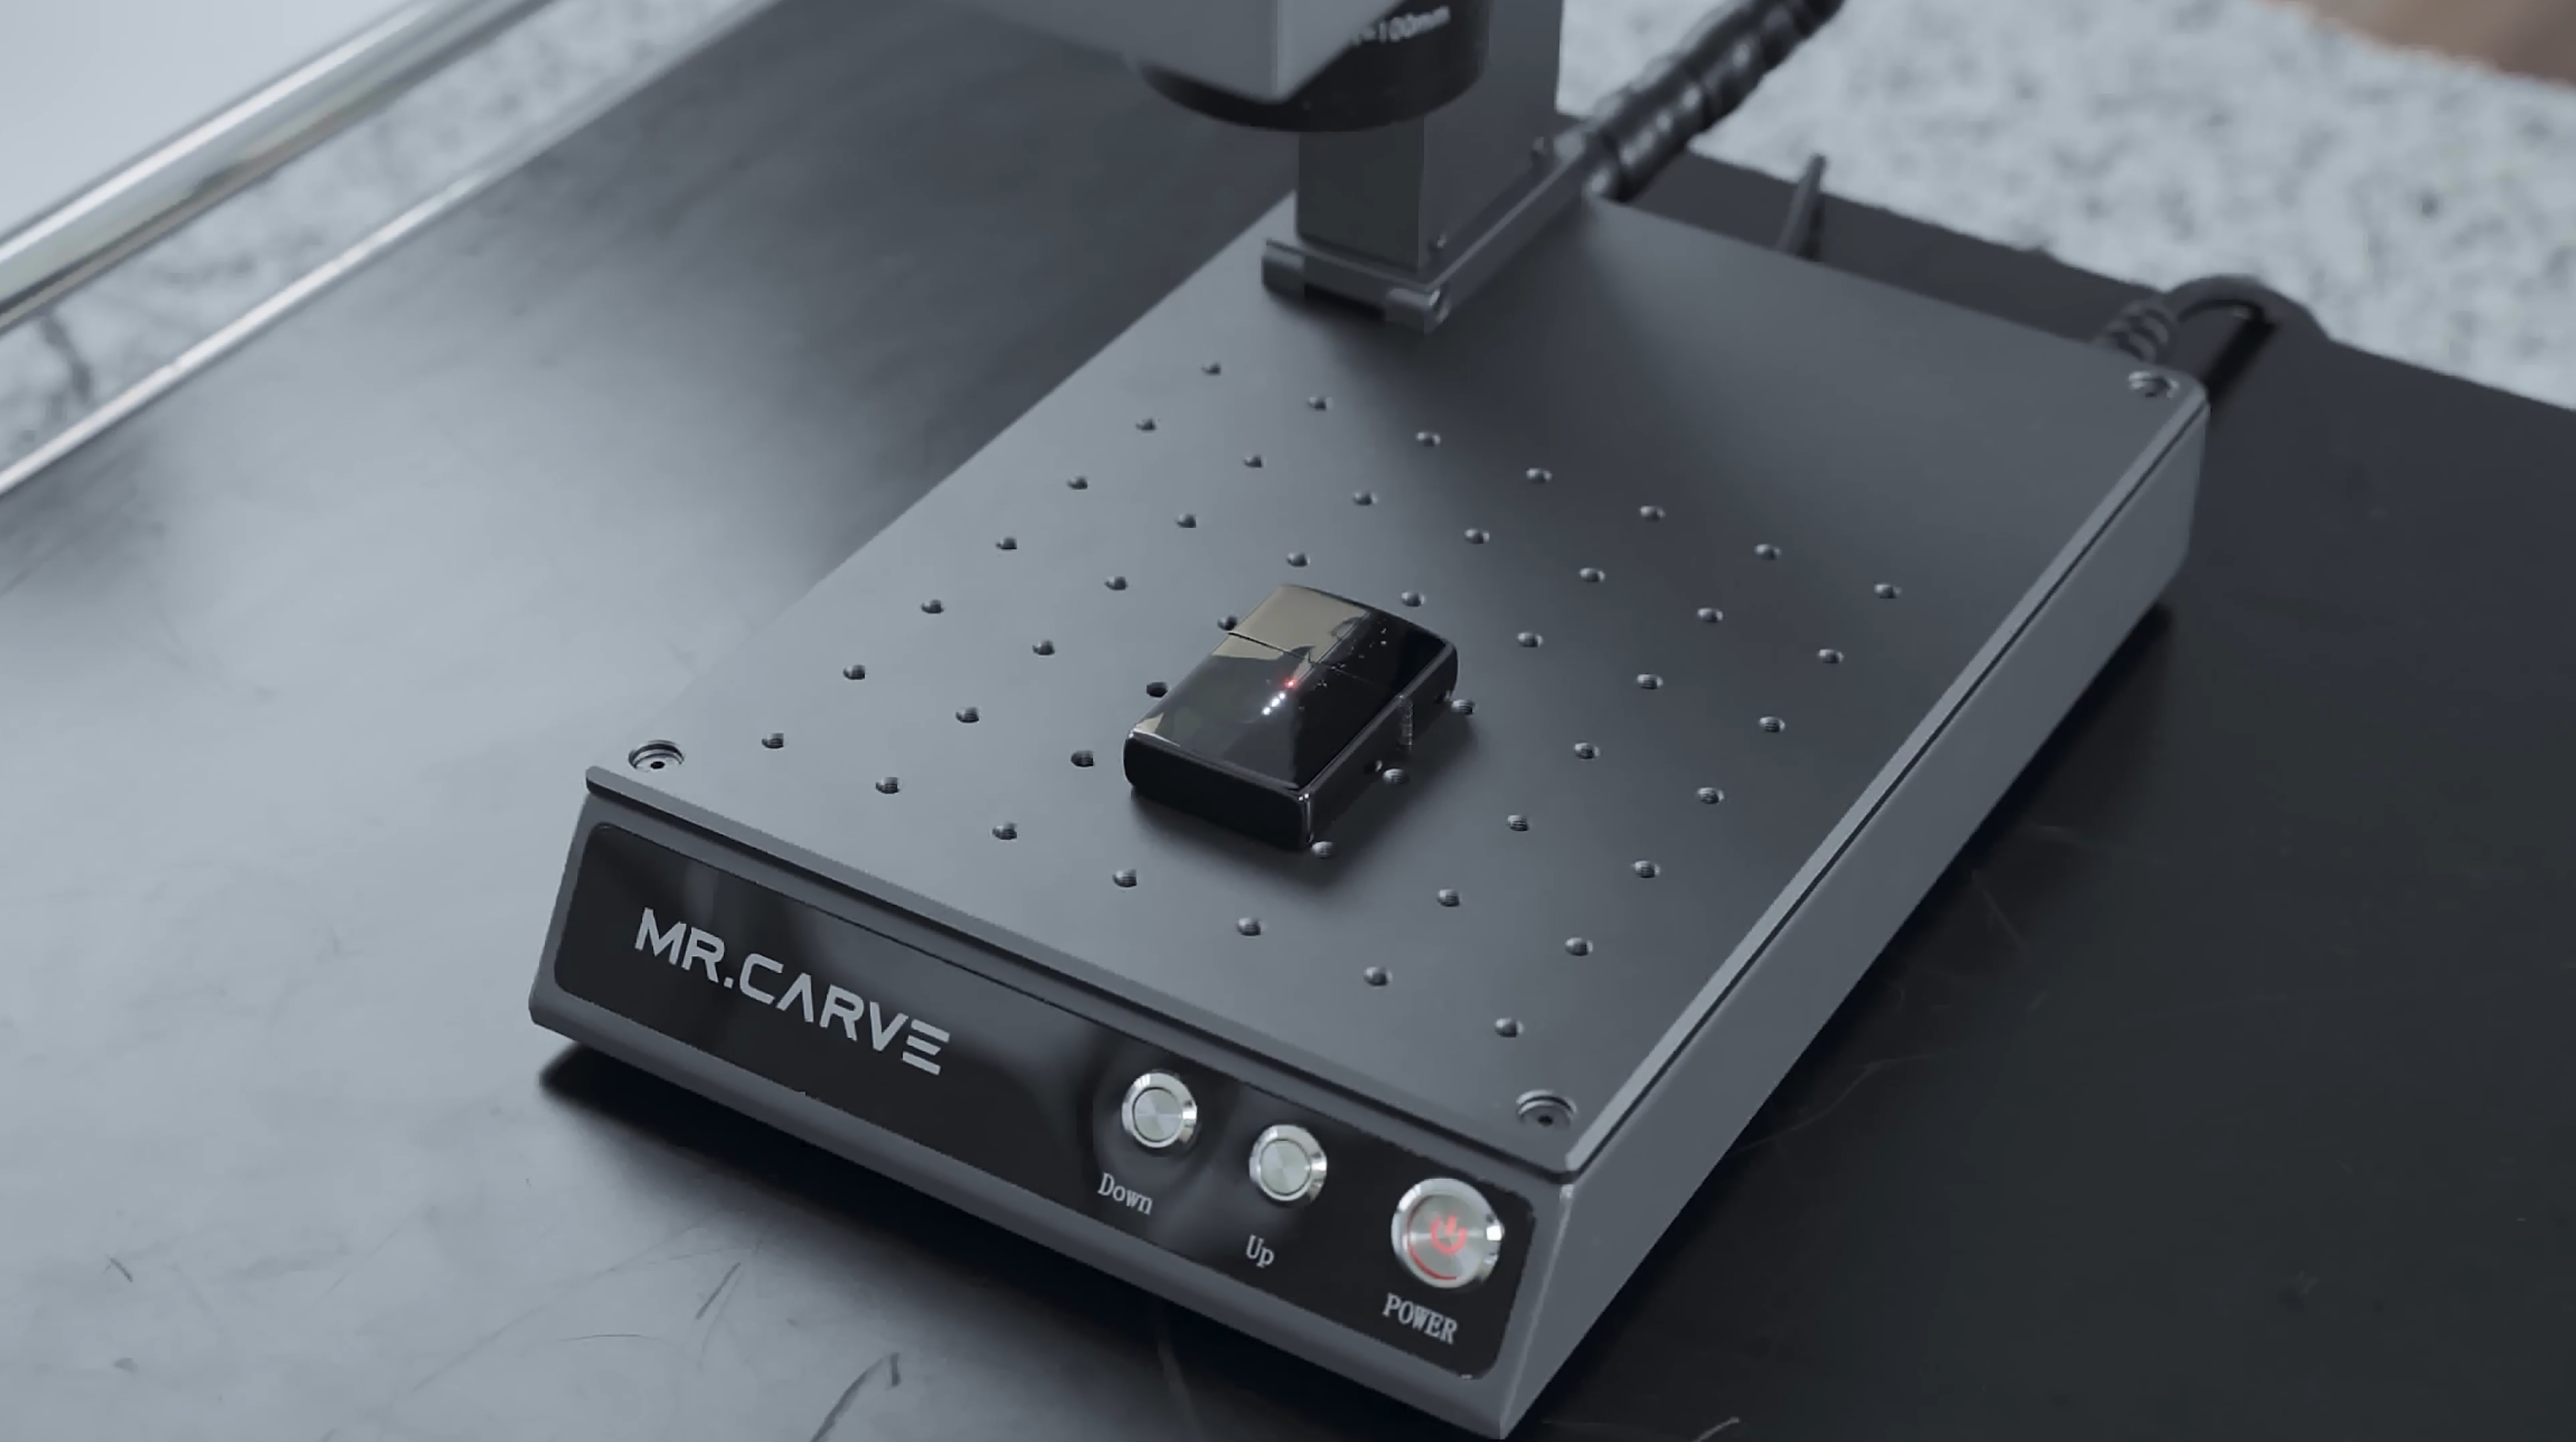 Creativity Space Technology Launches Kickstarter Campaign for Revolutionary M1 Mini All-Metal Engraver